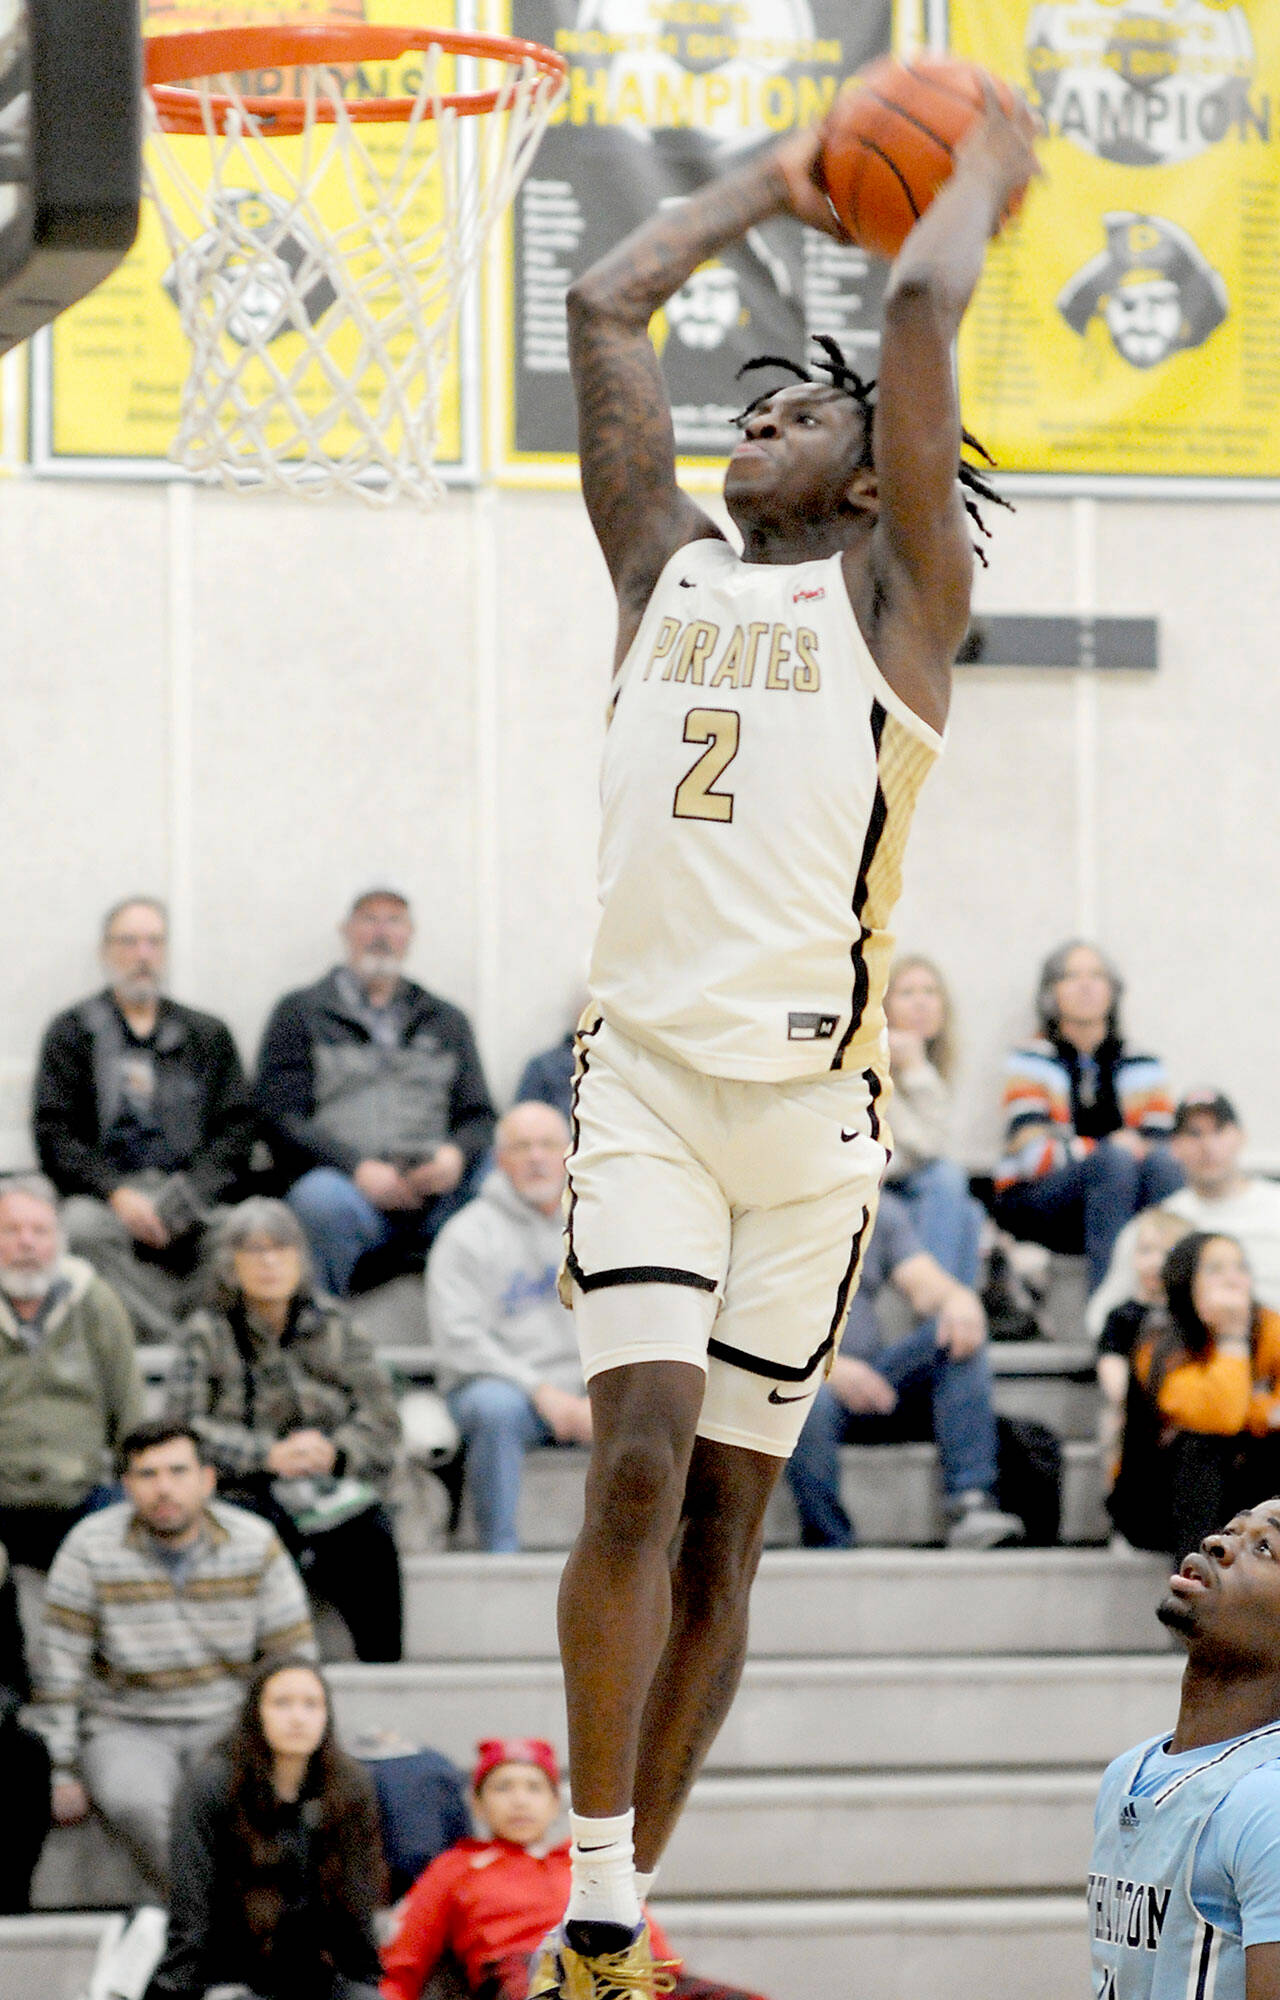 KEITH THORPE/PENINSULA DAILY NEWS Peninsula’s Ese Onakpoma makes a slam dunk after a quick steal against Whatcom on Wednesday evening in Port Angeles. Looking on is Whatcom’s Glenn Wabaluku.